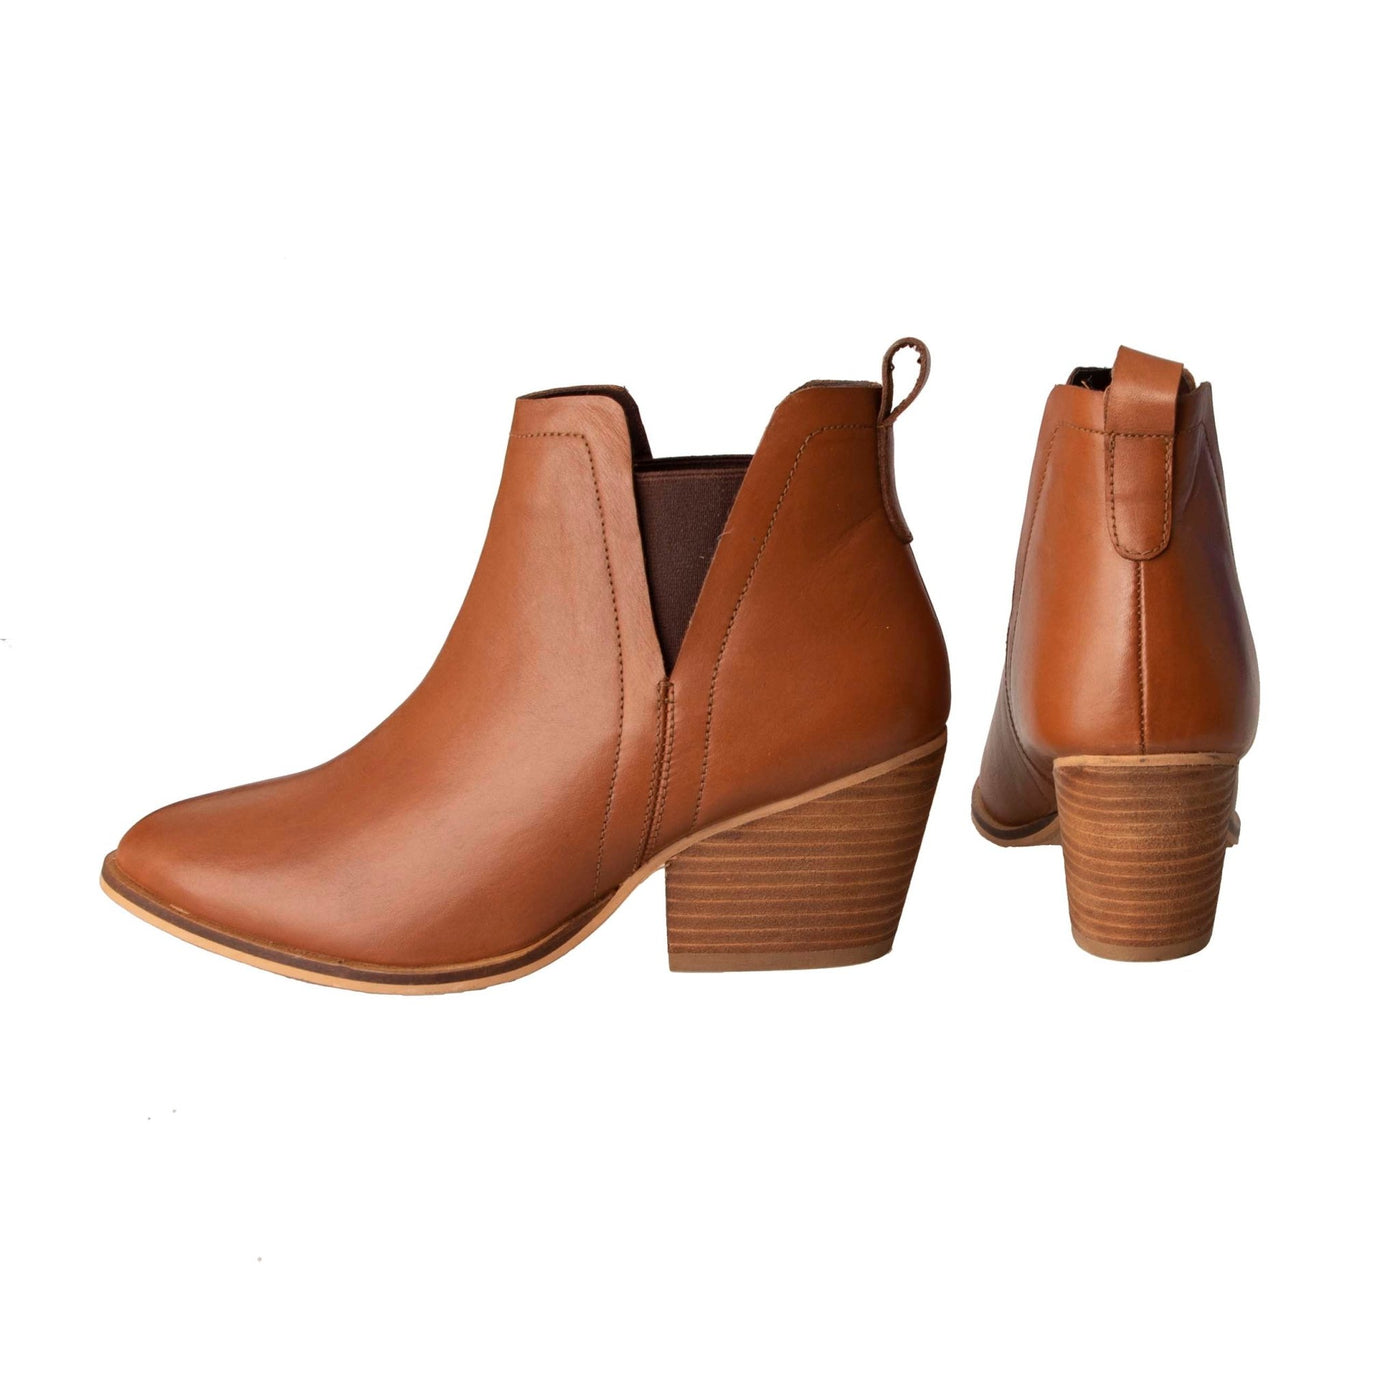 Human Shoes Thea Ankle Boot in Tan - Hey Sara